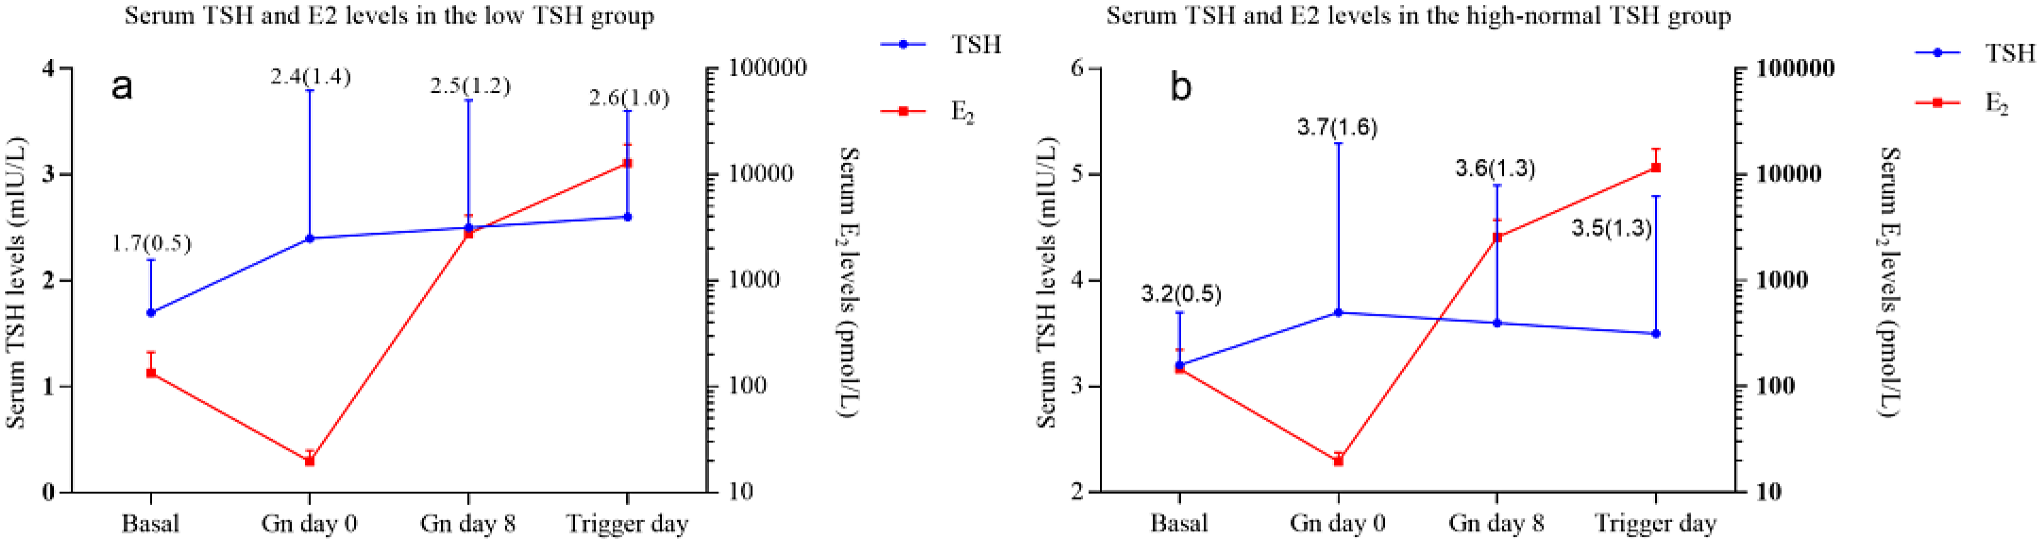 Thyroid-stimulating hormone levels are associated with estradiol levels and impact reproductive outcomes in preconceptionally euthyroid women undergoing their first IVF/ICSI cycles